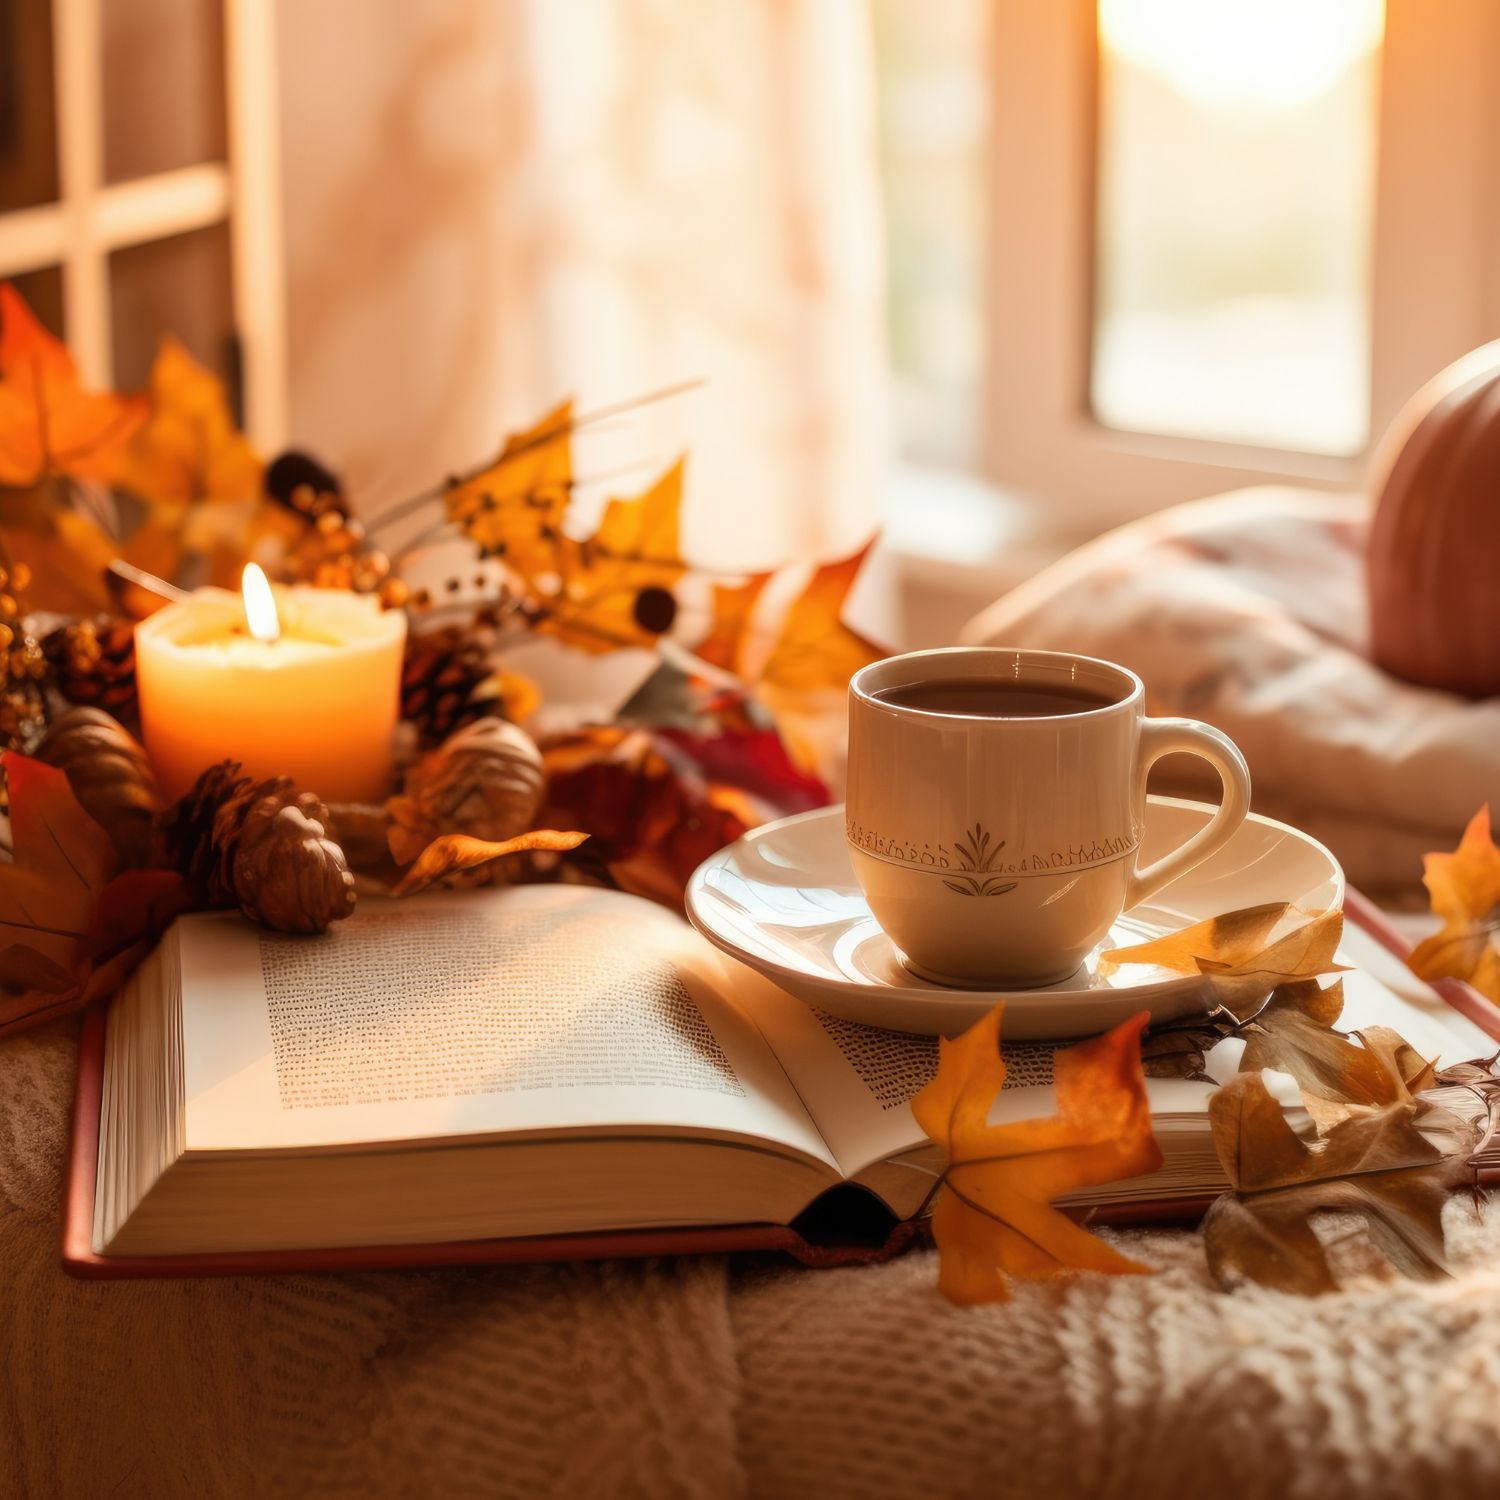 4 Reasons You Should Read More This Fall